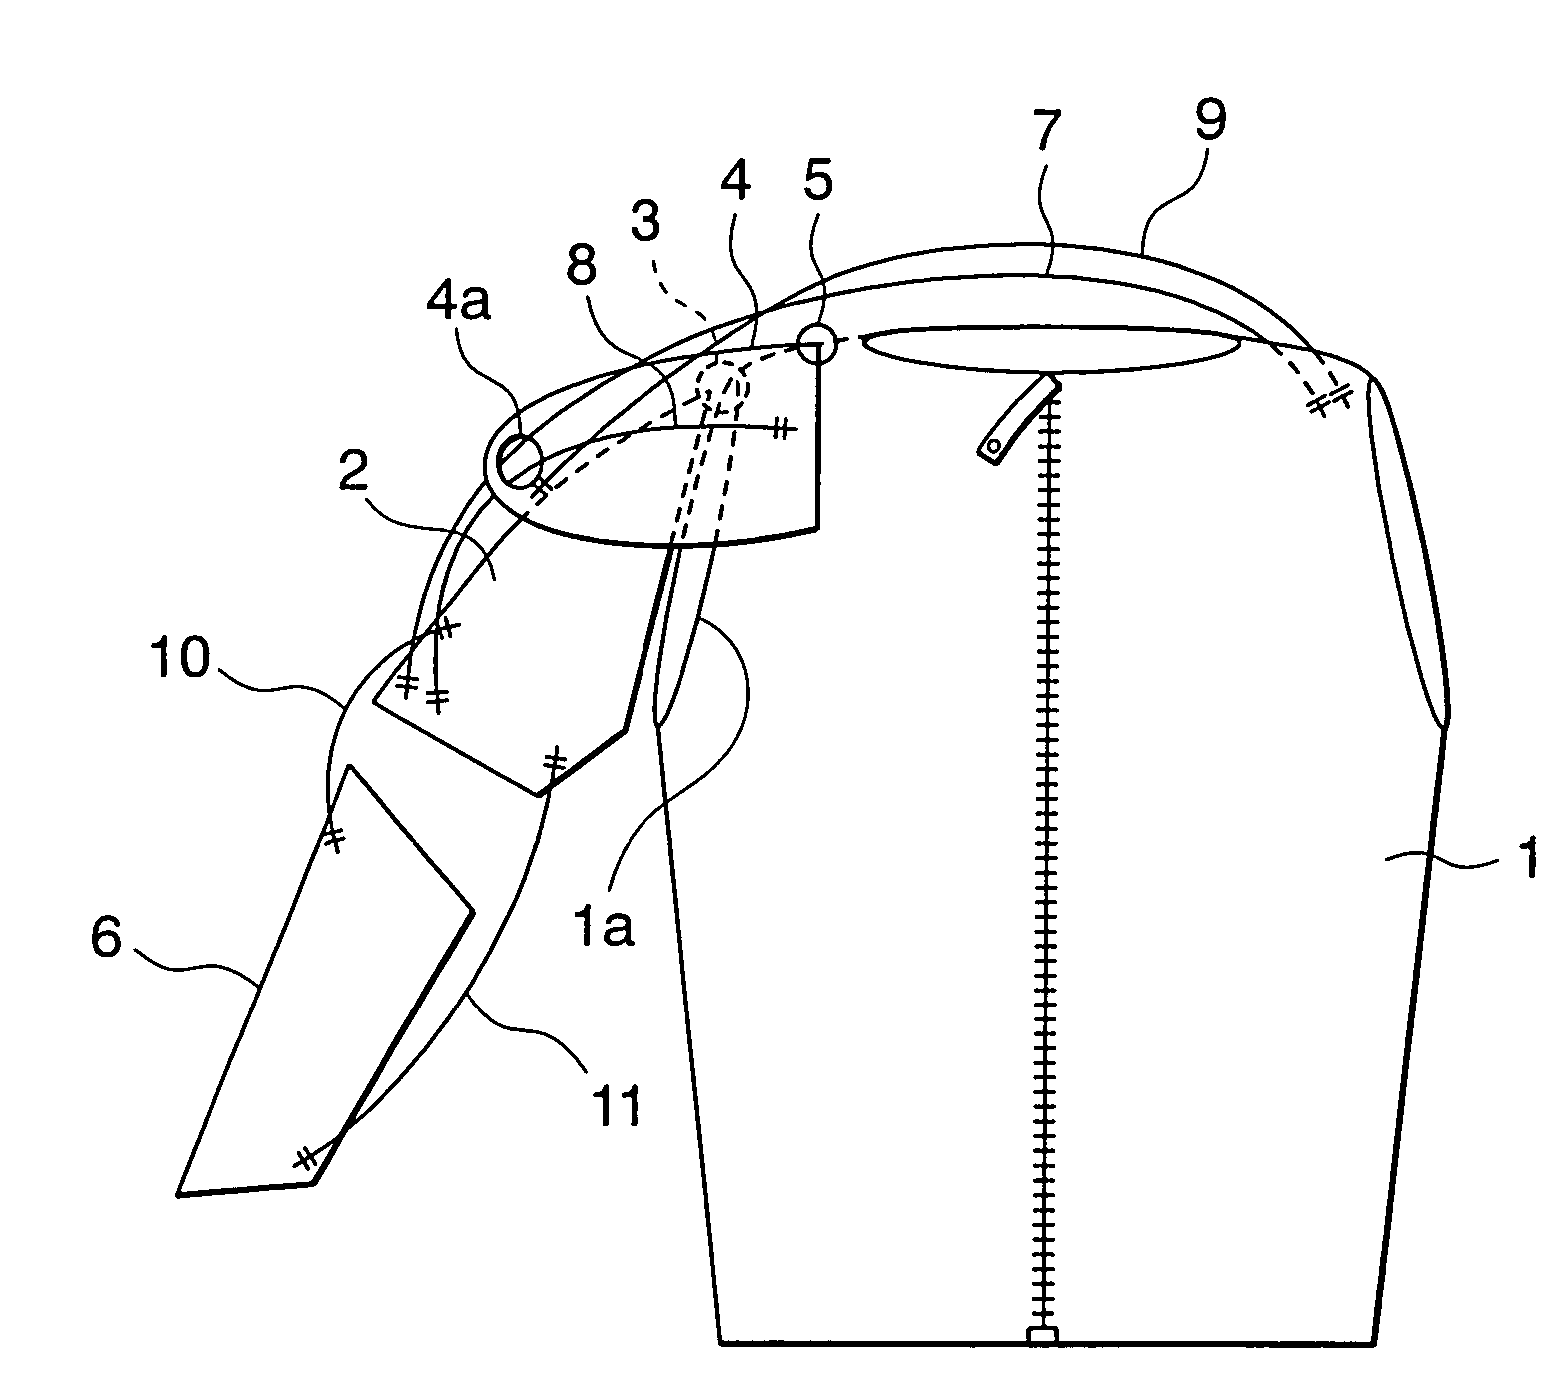 Wearable joint driving device